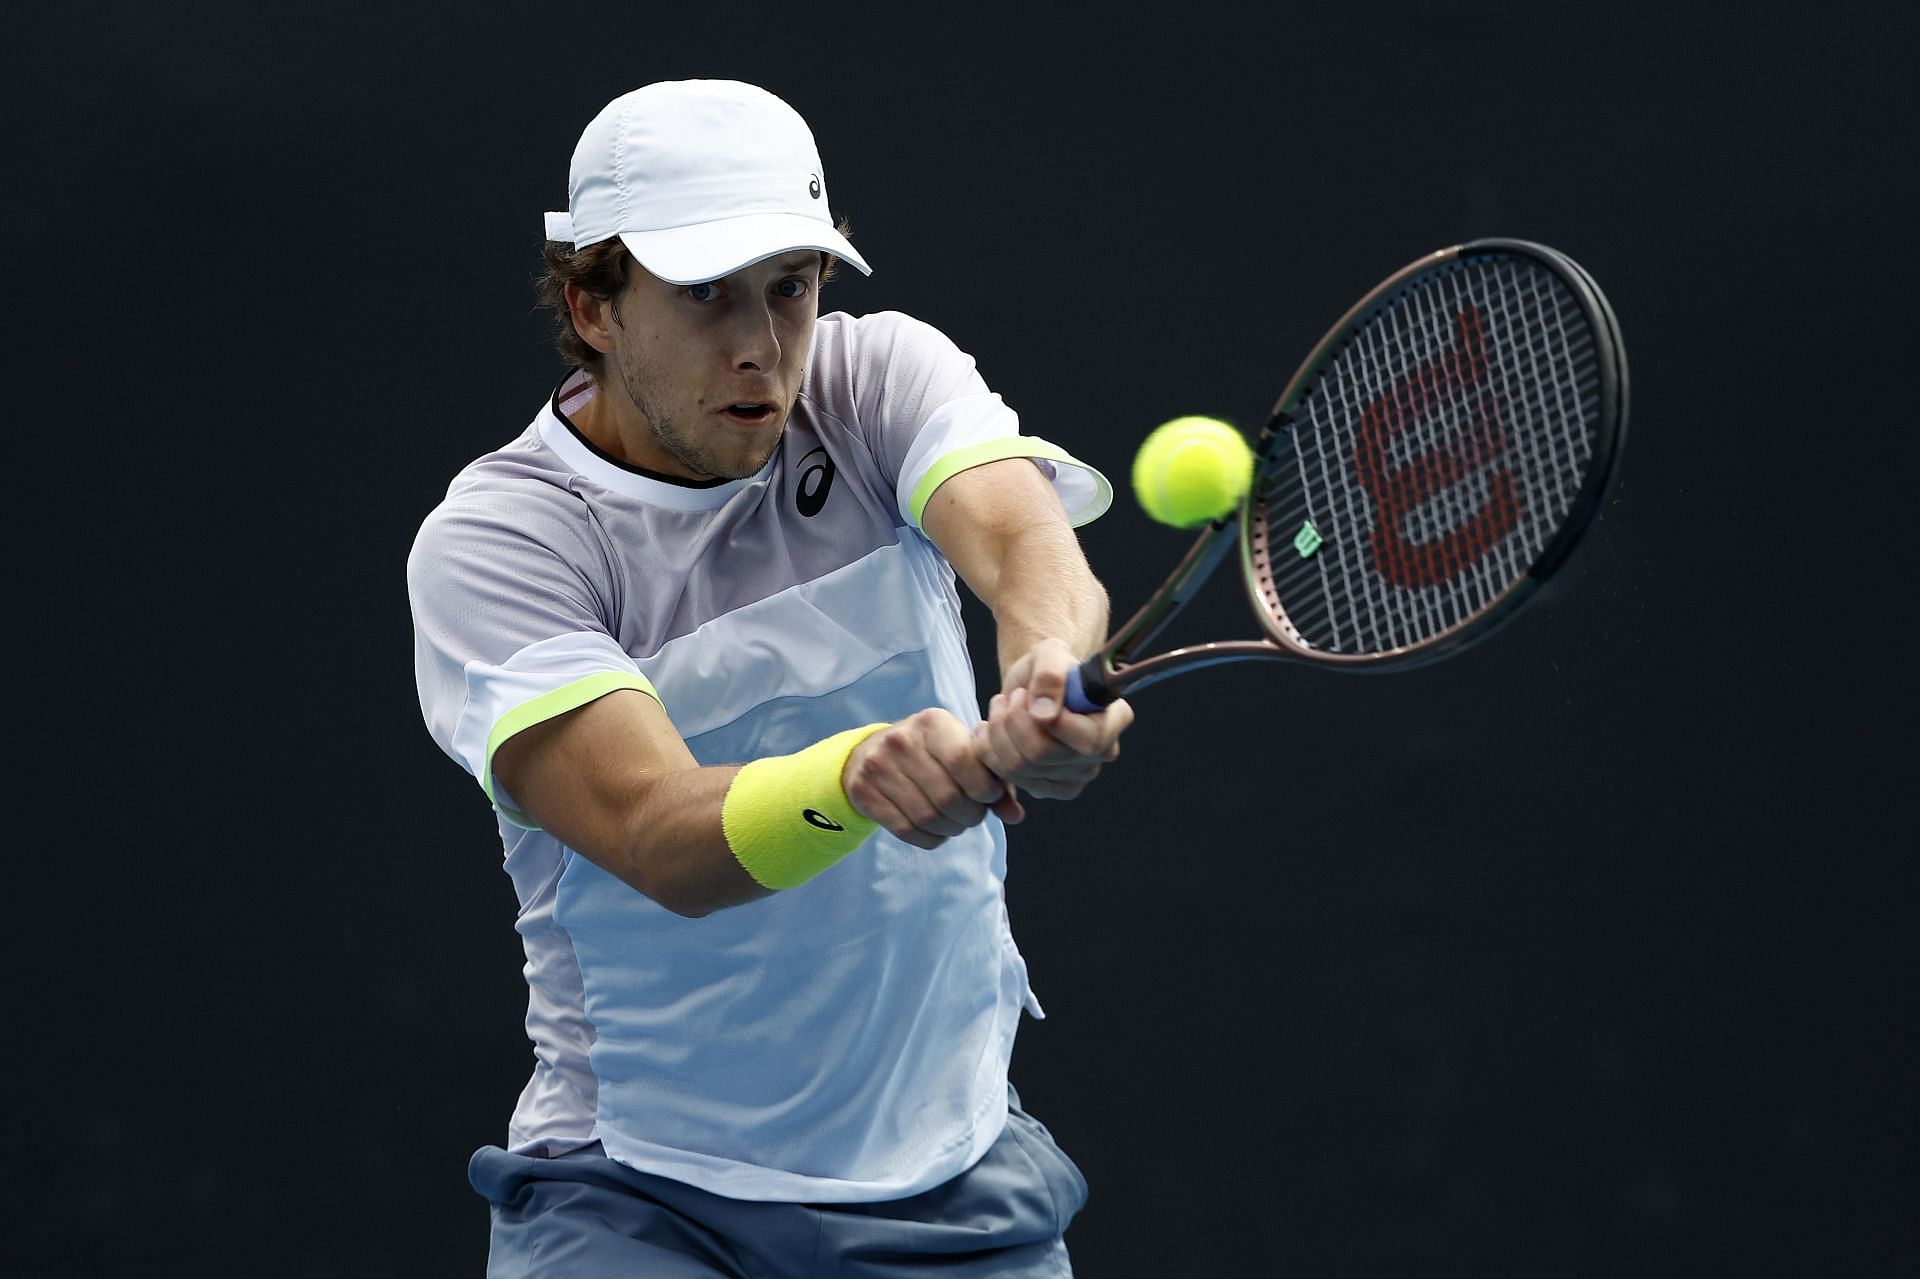 Holt in action at the 2023 Australian Open